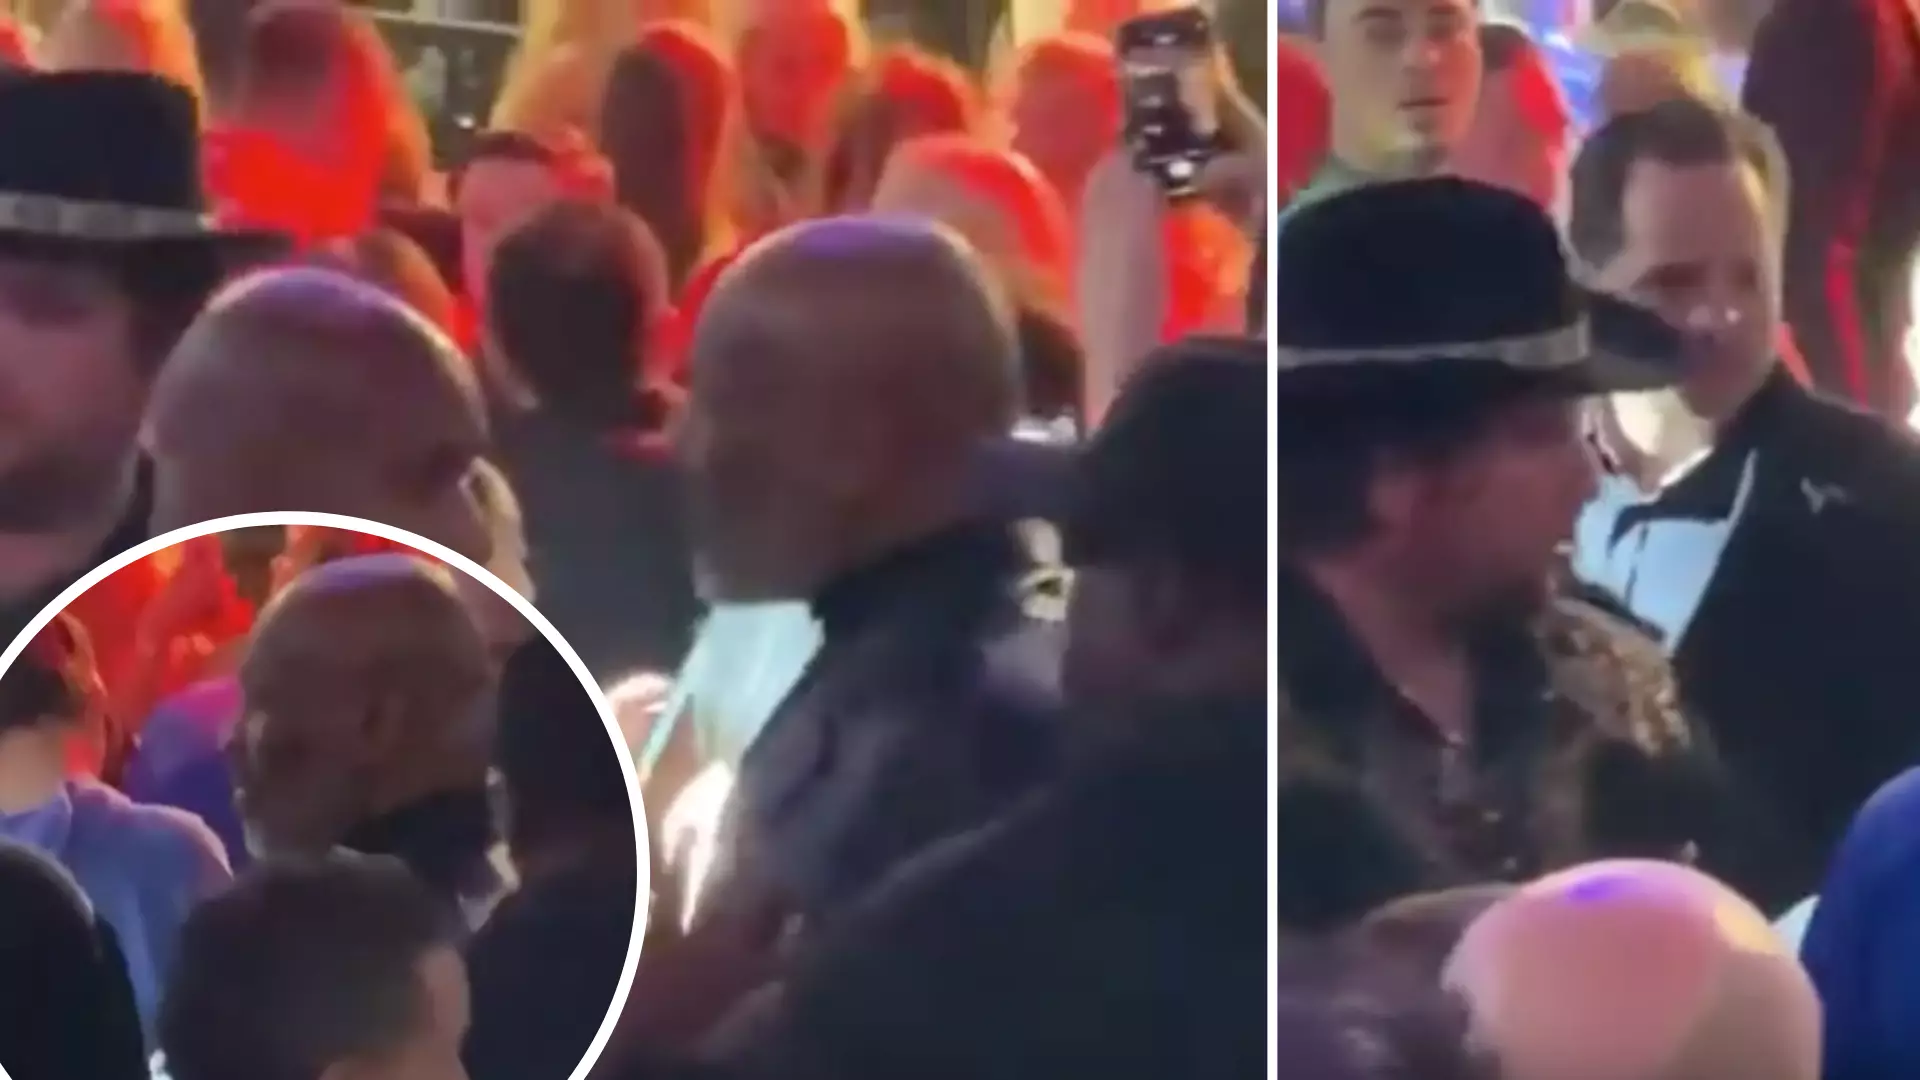 Unseen Footage Of Mike Tyson In Altercation With Fan Trying To Sneak A Cheeky Selfie